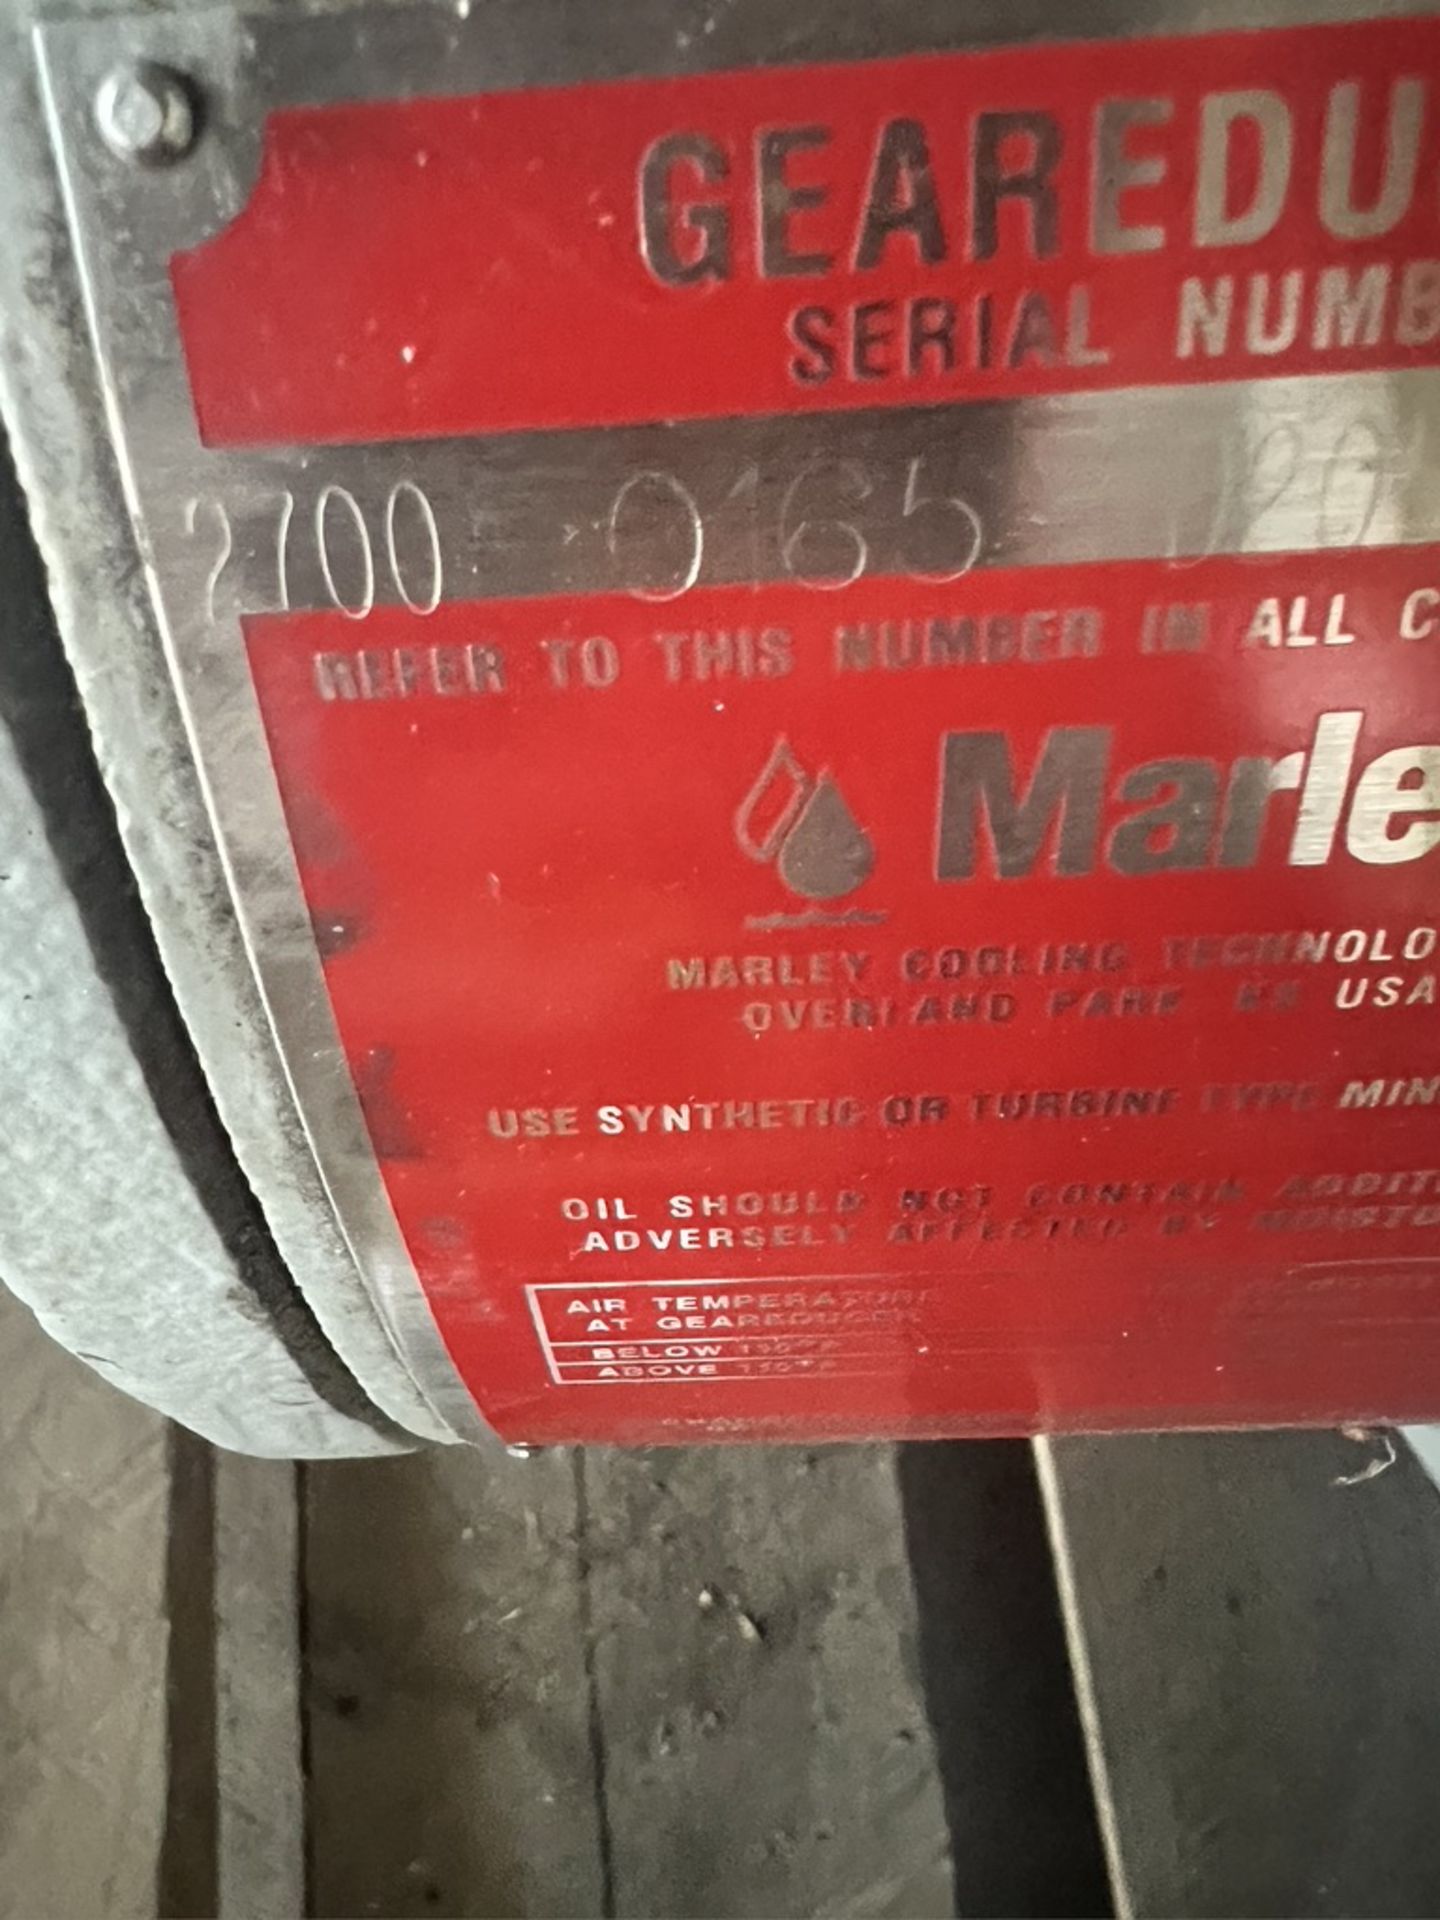 Marley Gear Reducer For Cooling Towers, Model 2700, 0165, D20577, 5.77 (SIMPLE LOADING FEE $110) - Image 6 of 10